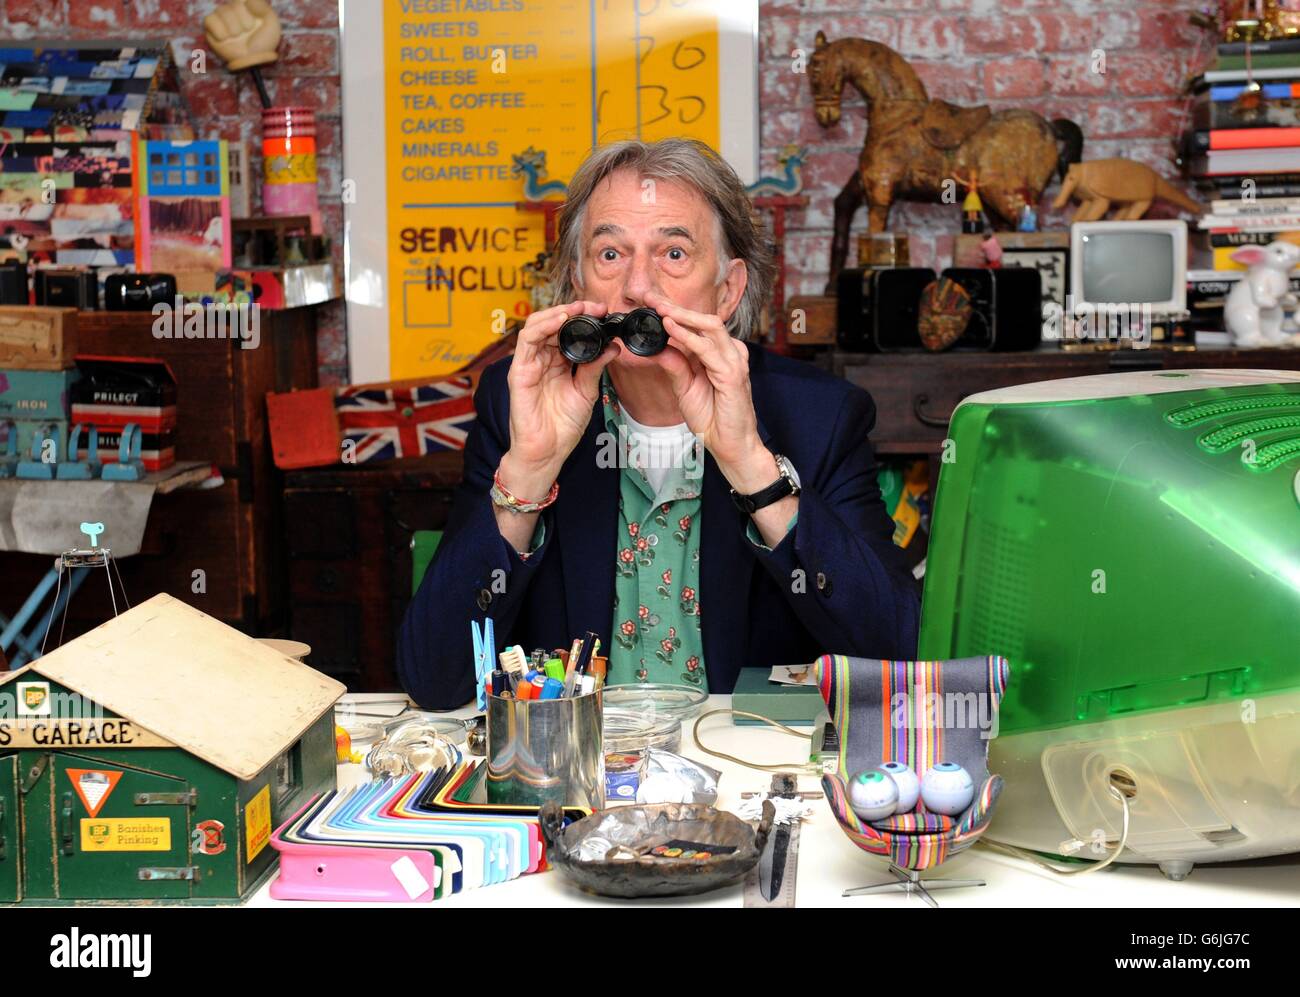 Fashion Designer Paul Smith poses for photographs in a replica of one of his original working spaces at the opening of his new exhibition 'Hello, My Name is Paul Smith' at the Design Museum, London. The exhibition features hundreds of objects from the designers personal archive, including photographs, objects and many of his clothing designs from throughout his career. Stock Photo